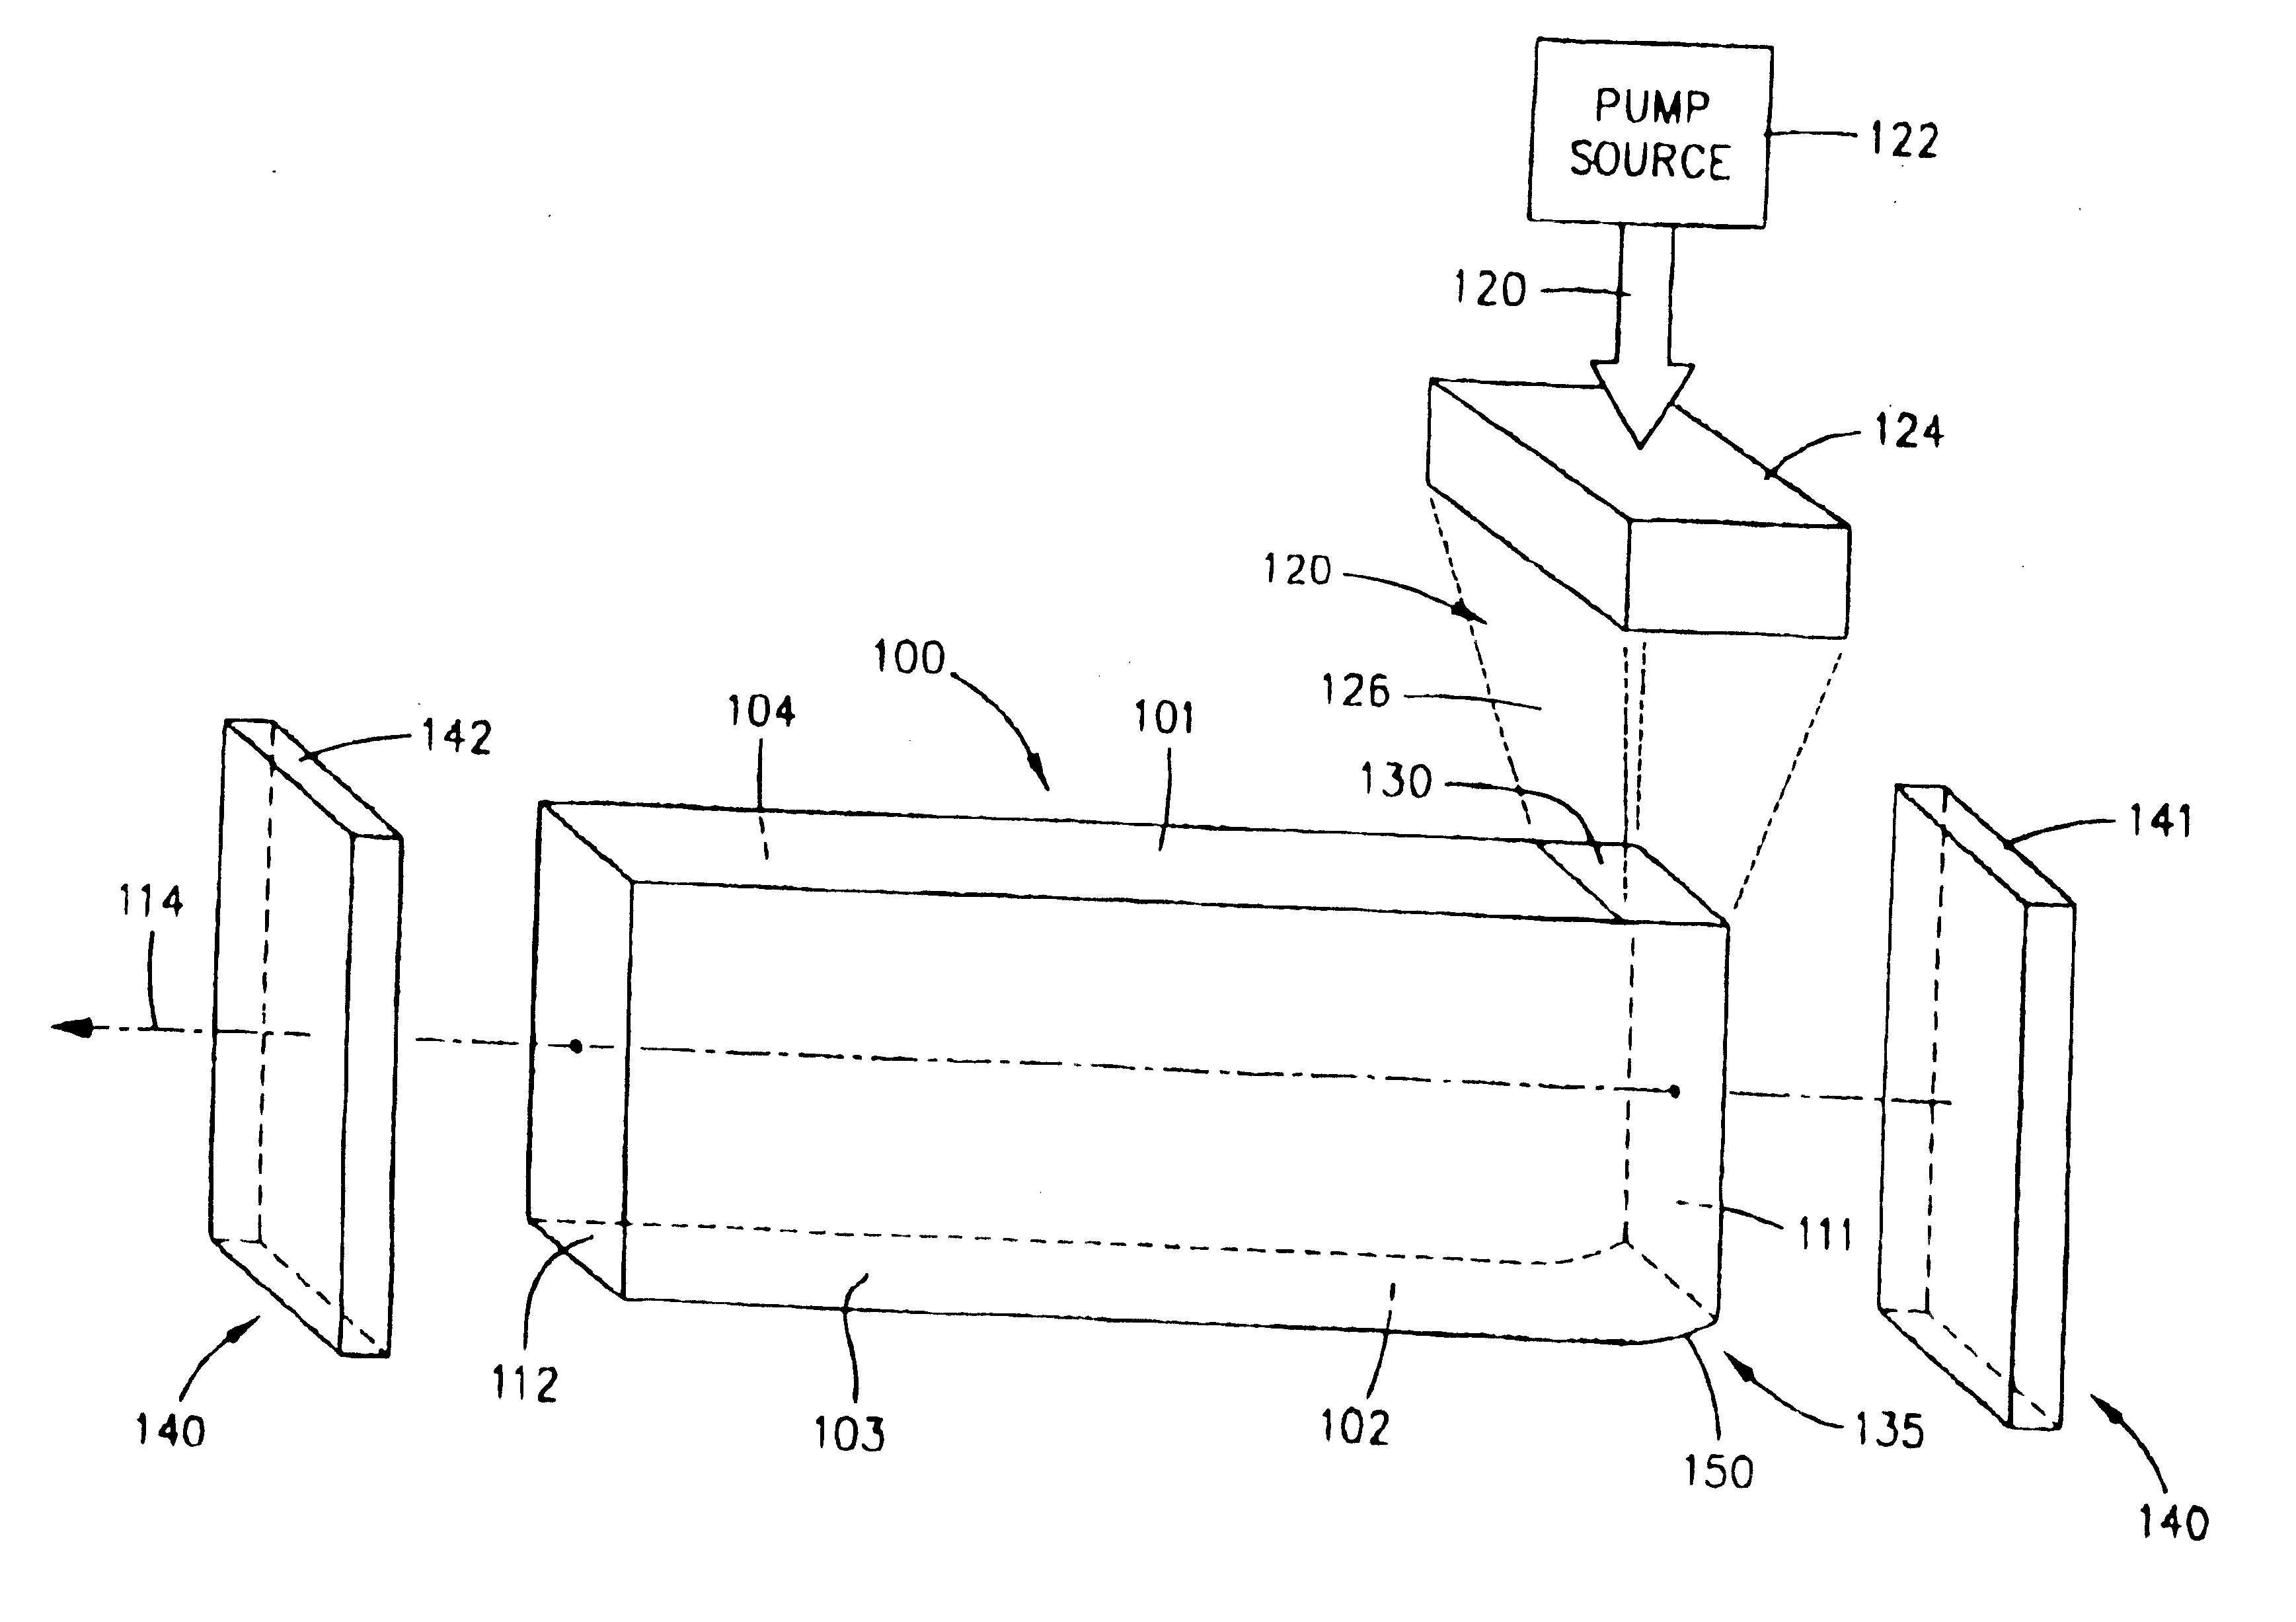 Laser with gain medium configured to provide an integrated optical pump cavity